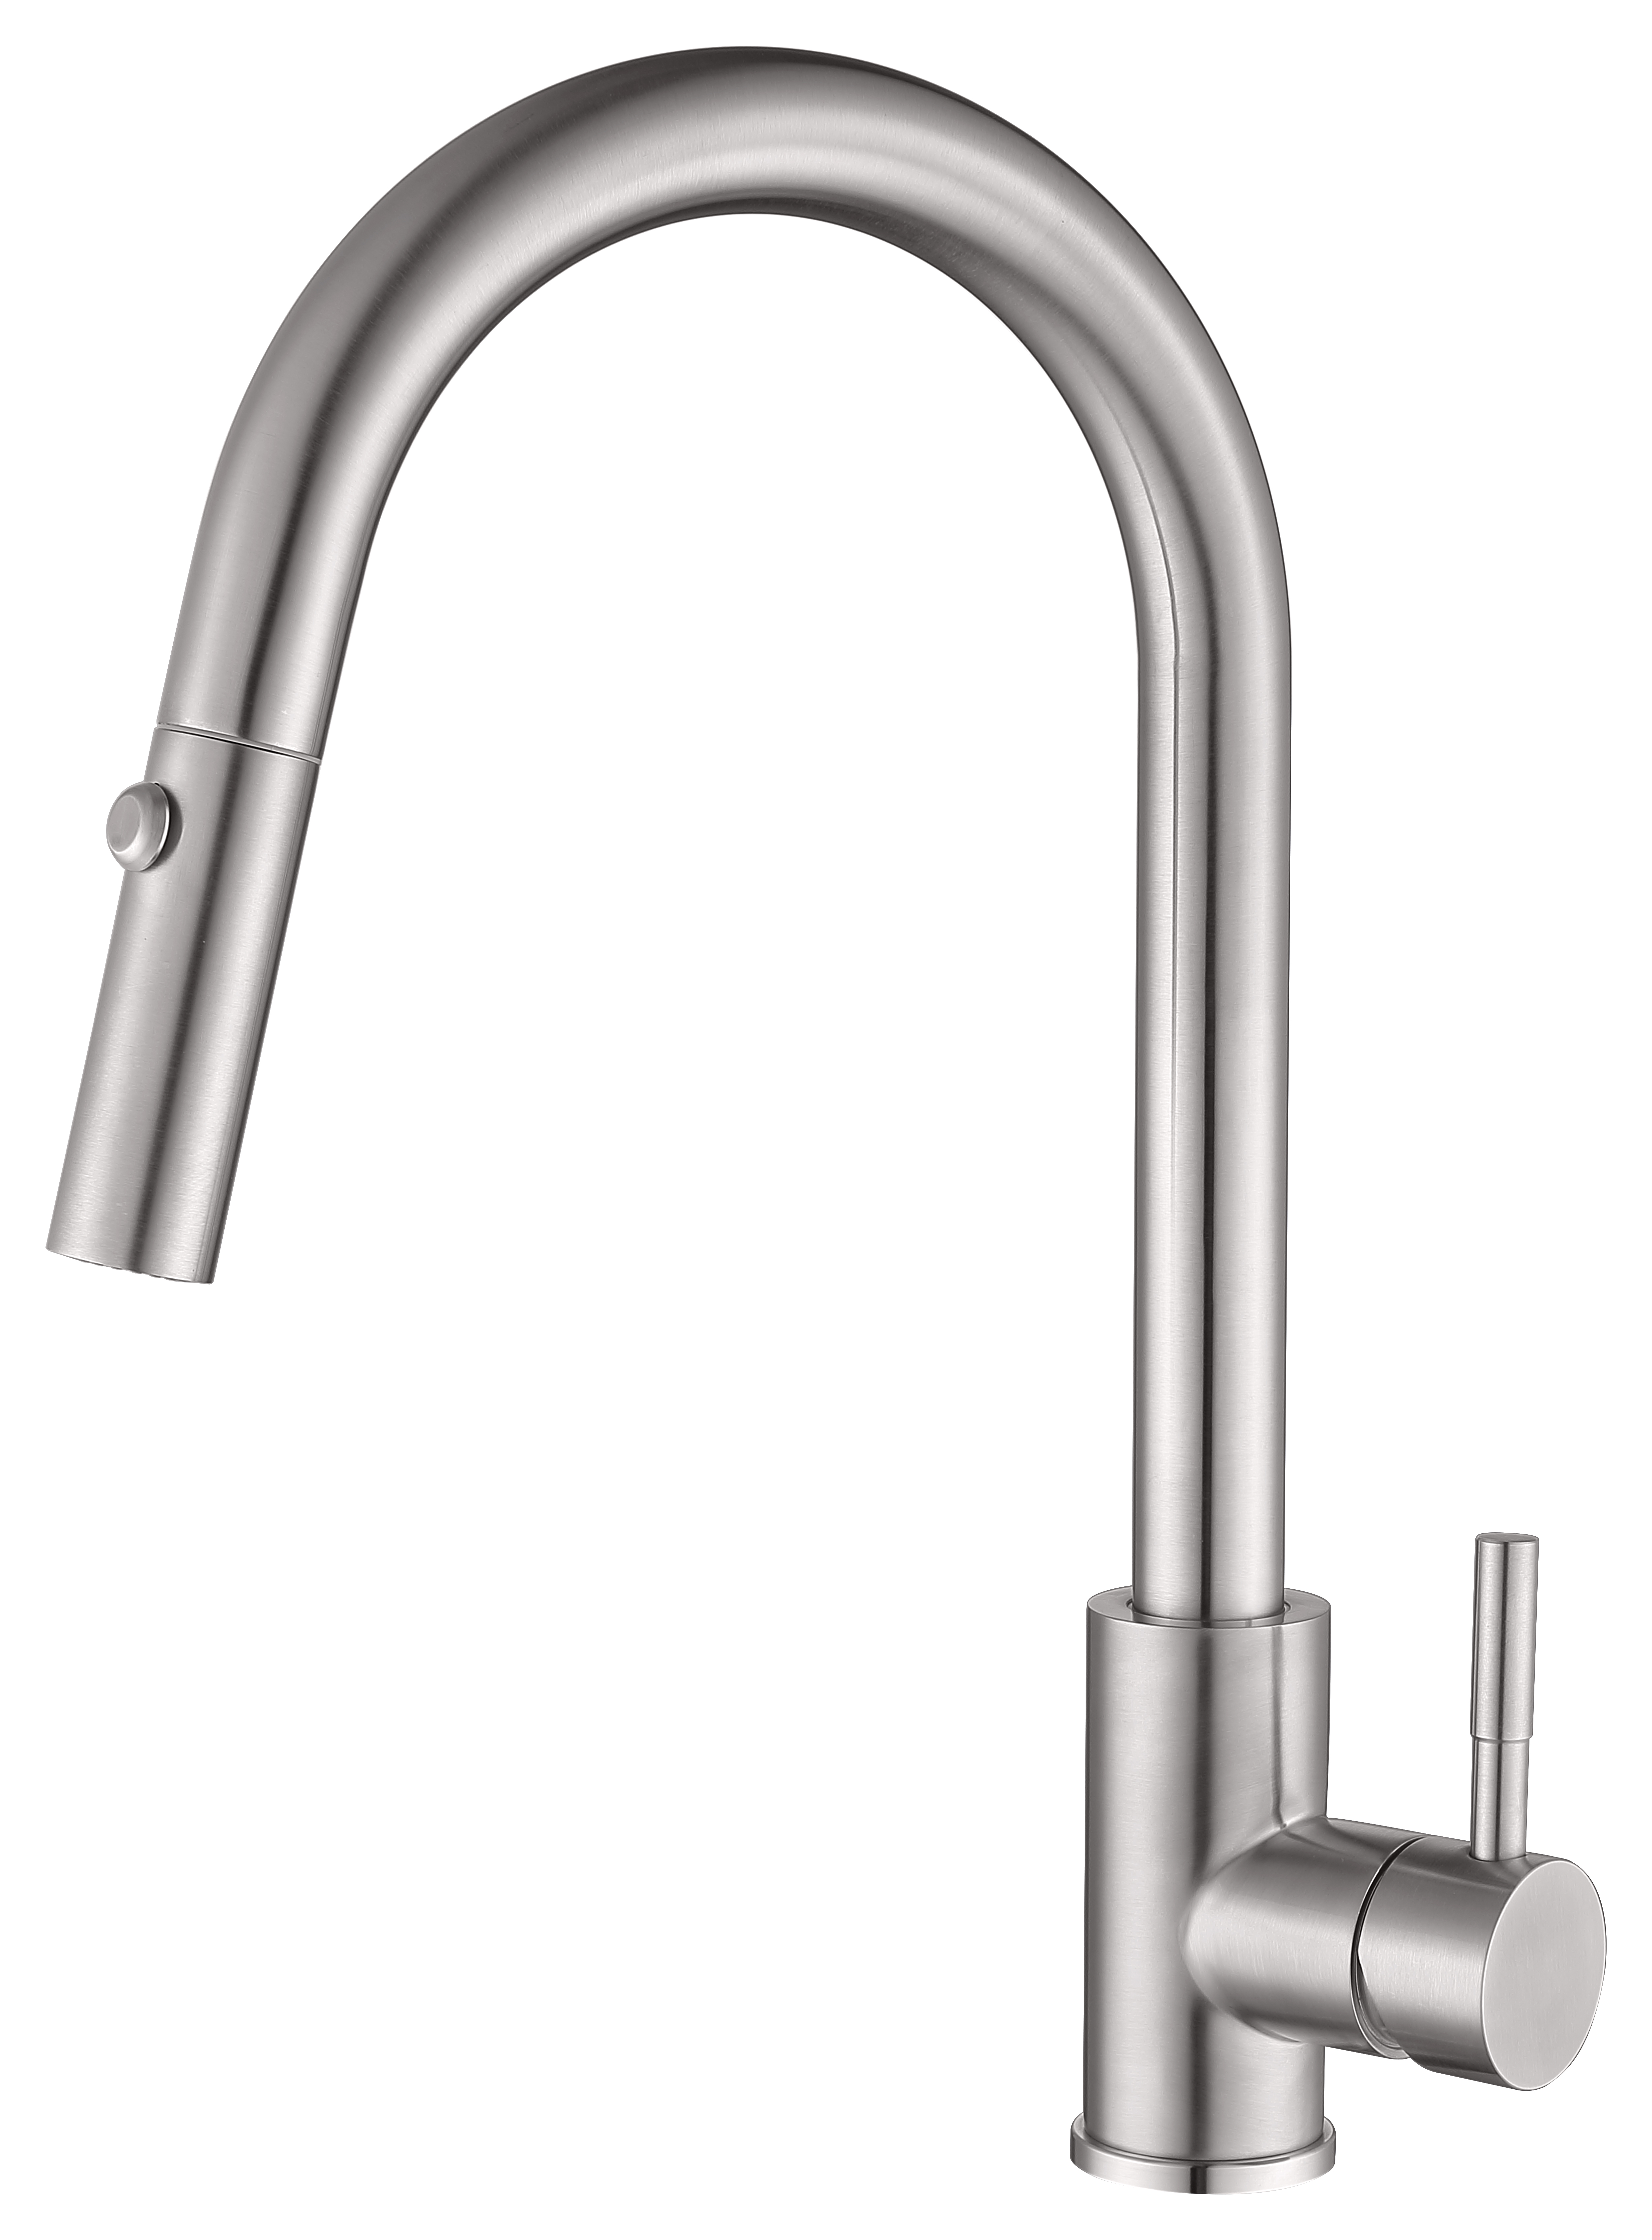 Dual function faucet Brass Round Mixer Tap with 360 Swivel and Pull Out kitchen faucet